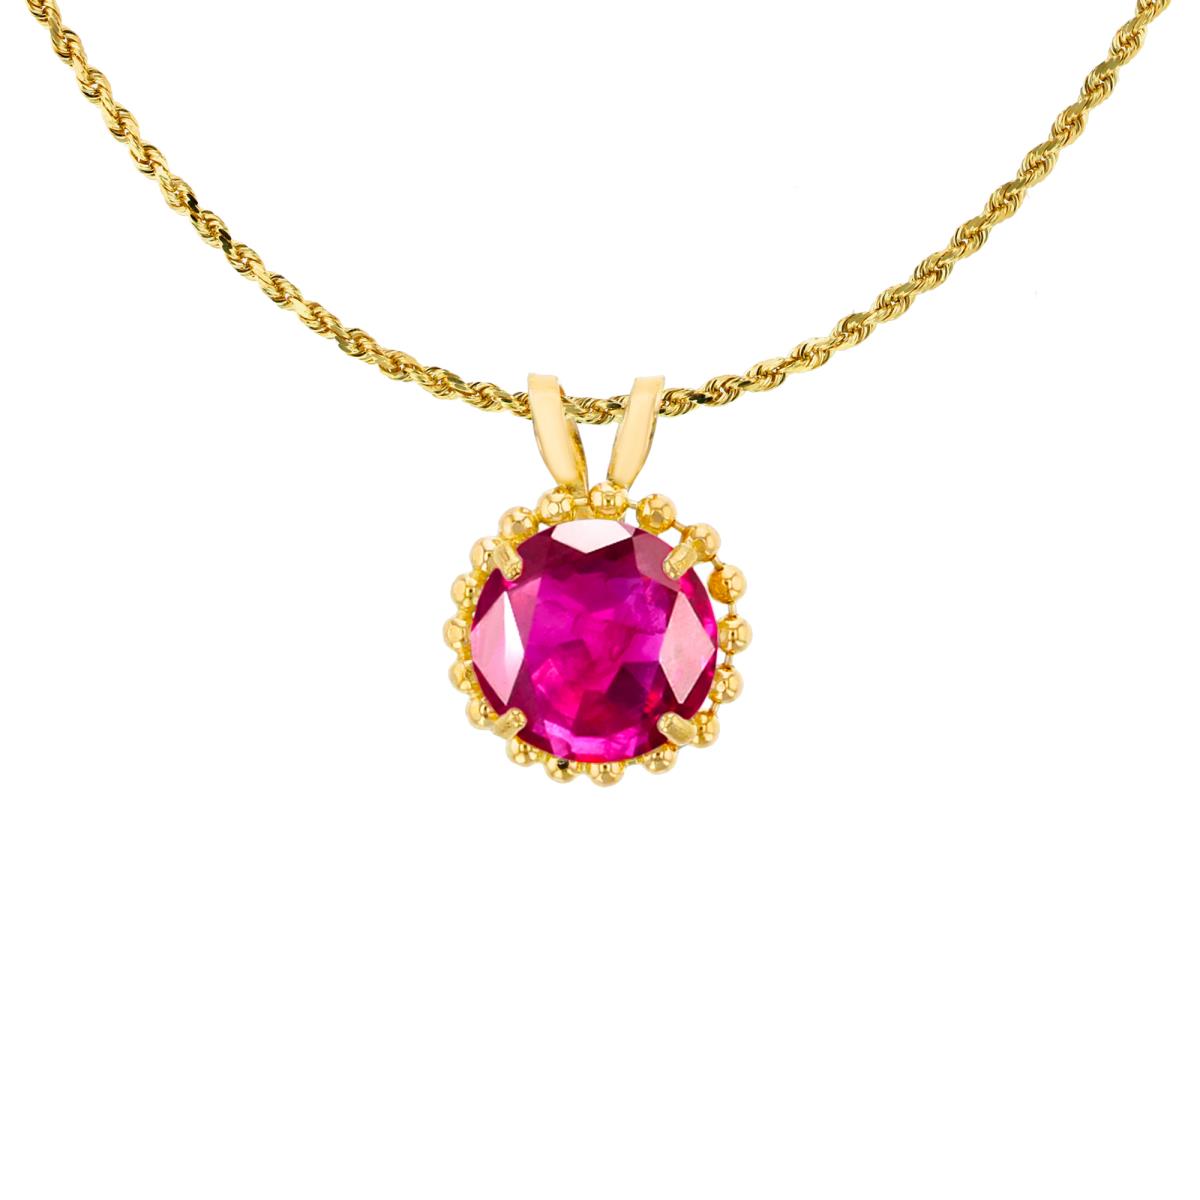 10K Yellow Gold 6mm Rd Cut Glass Filled Ruby with Bead Frame Rabbit Ear 18" Necklace